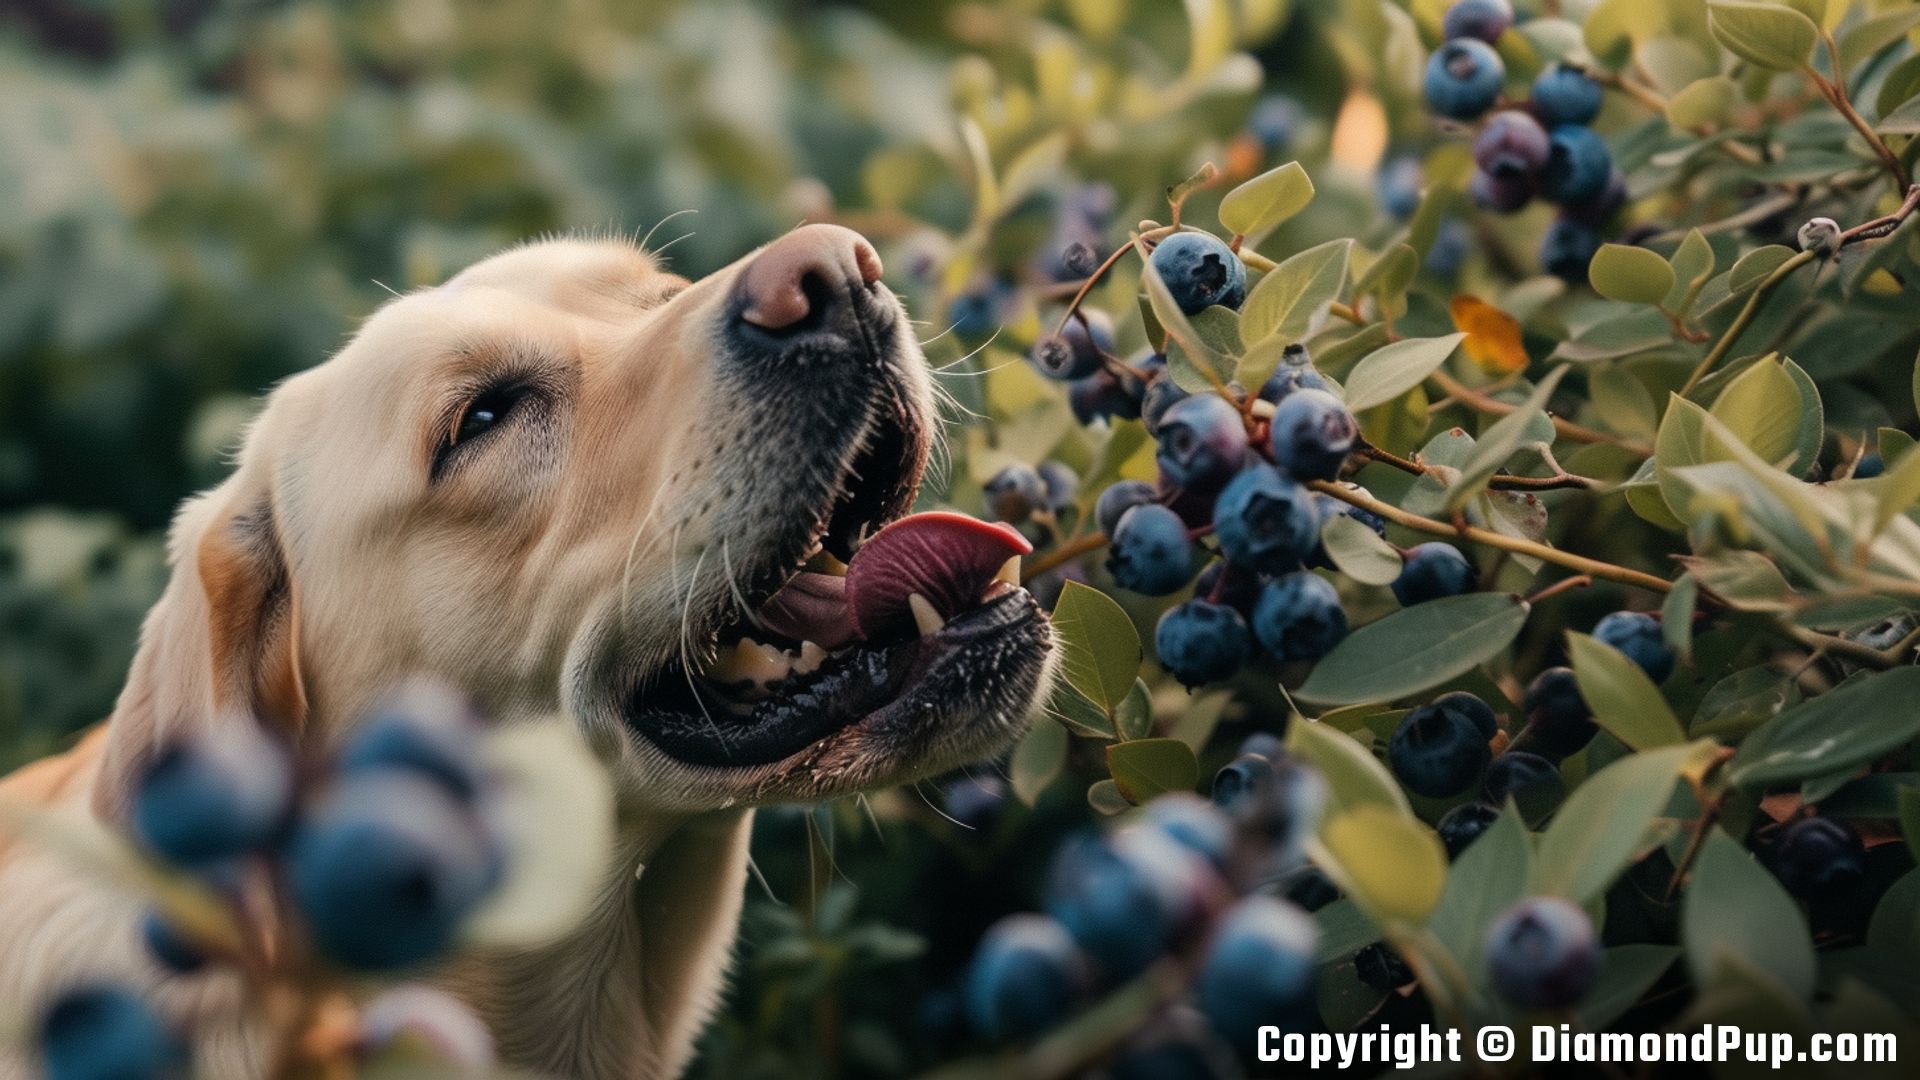 Image of a Cute Labrador Eating Blueberries